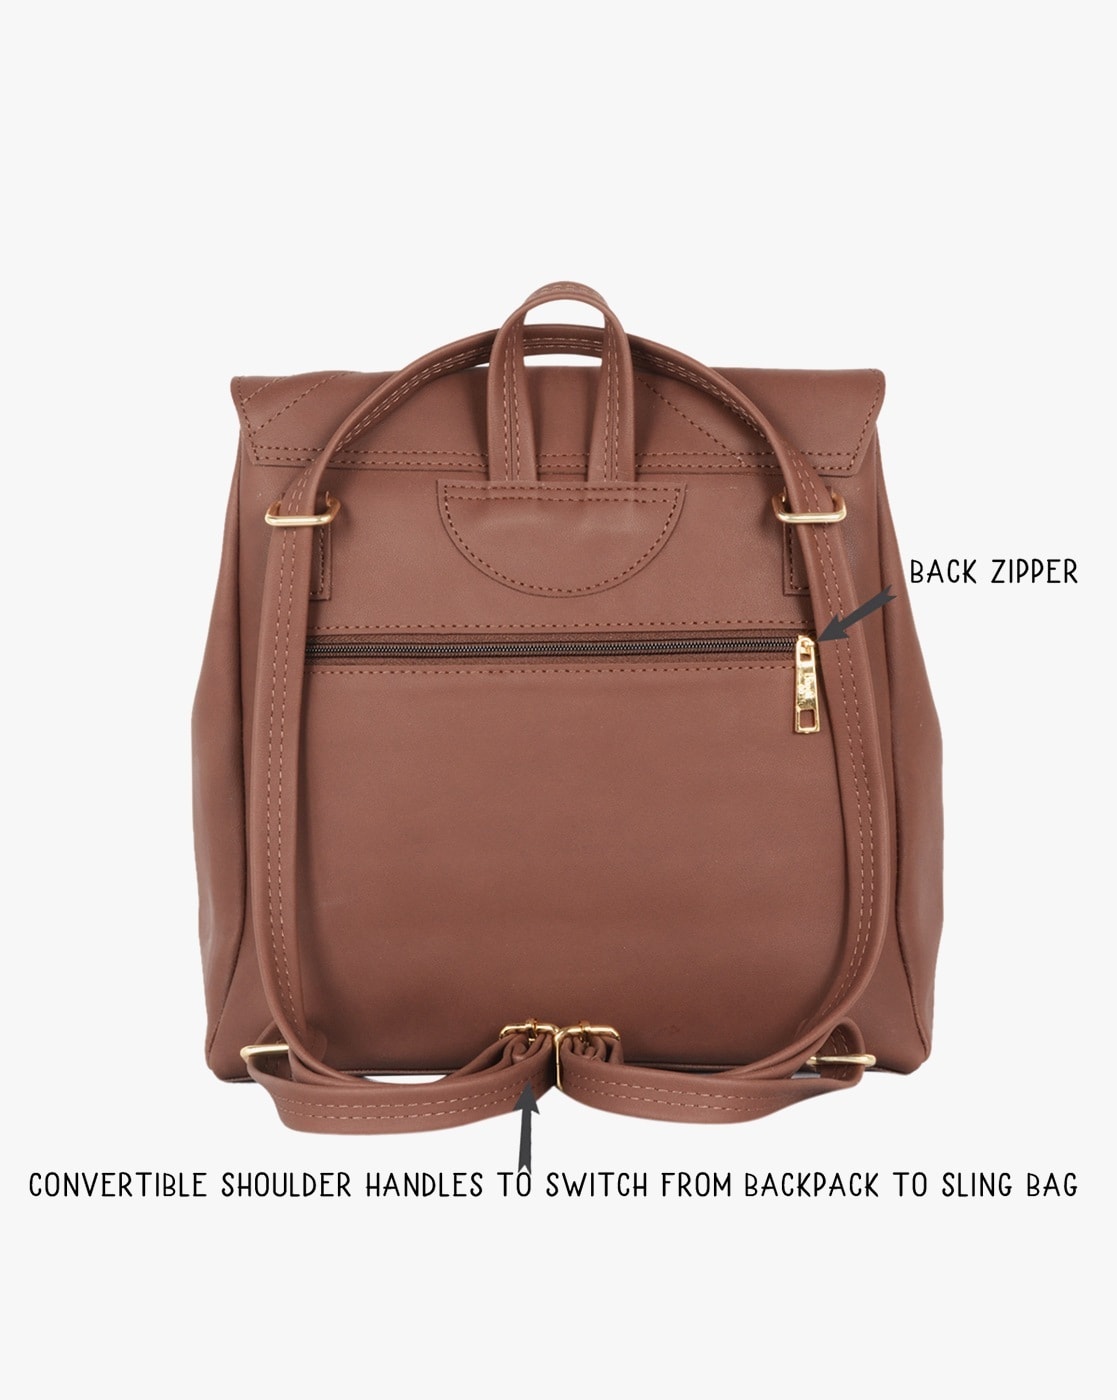 Mayfield Backpack Purse | Feel Good Shop Local